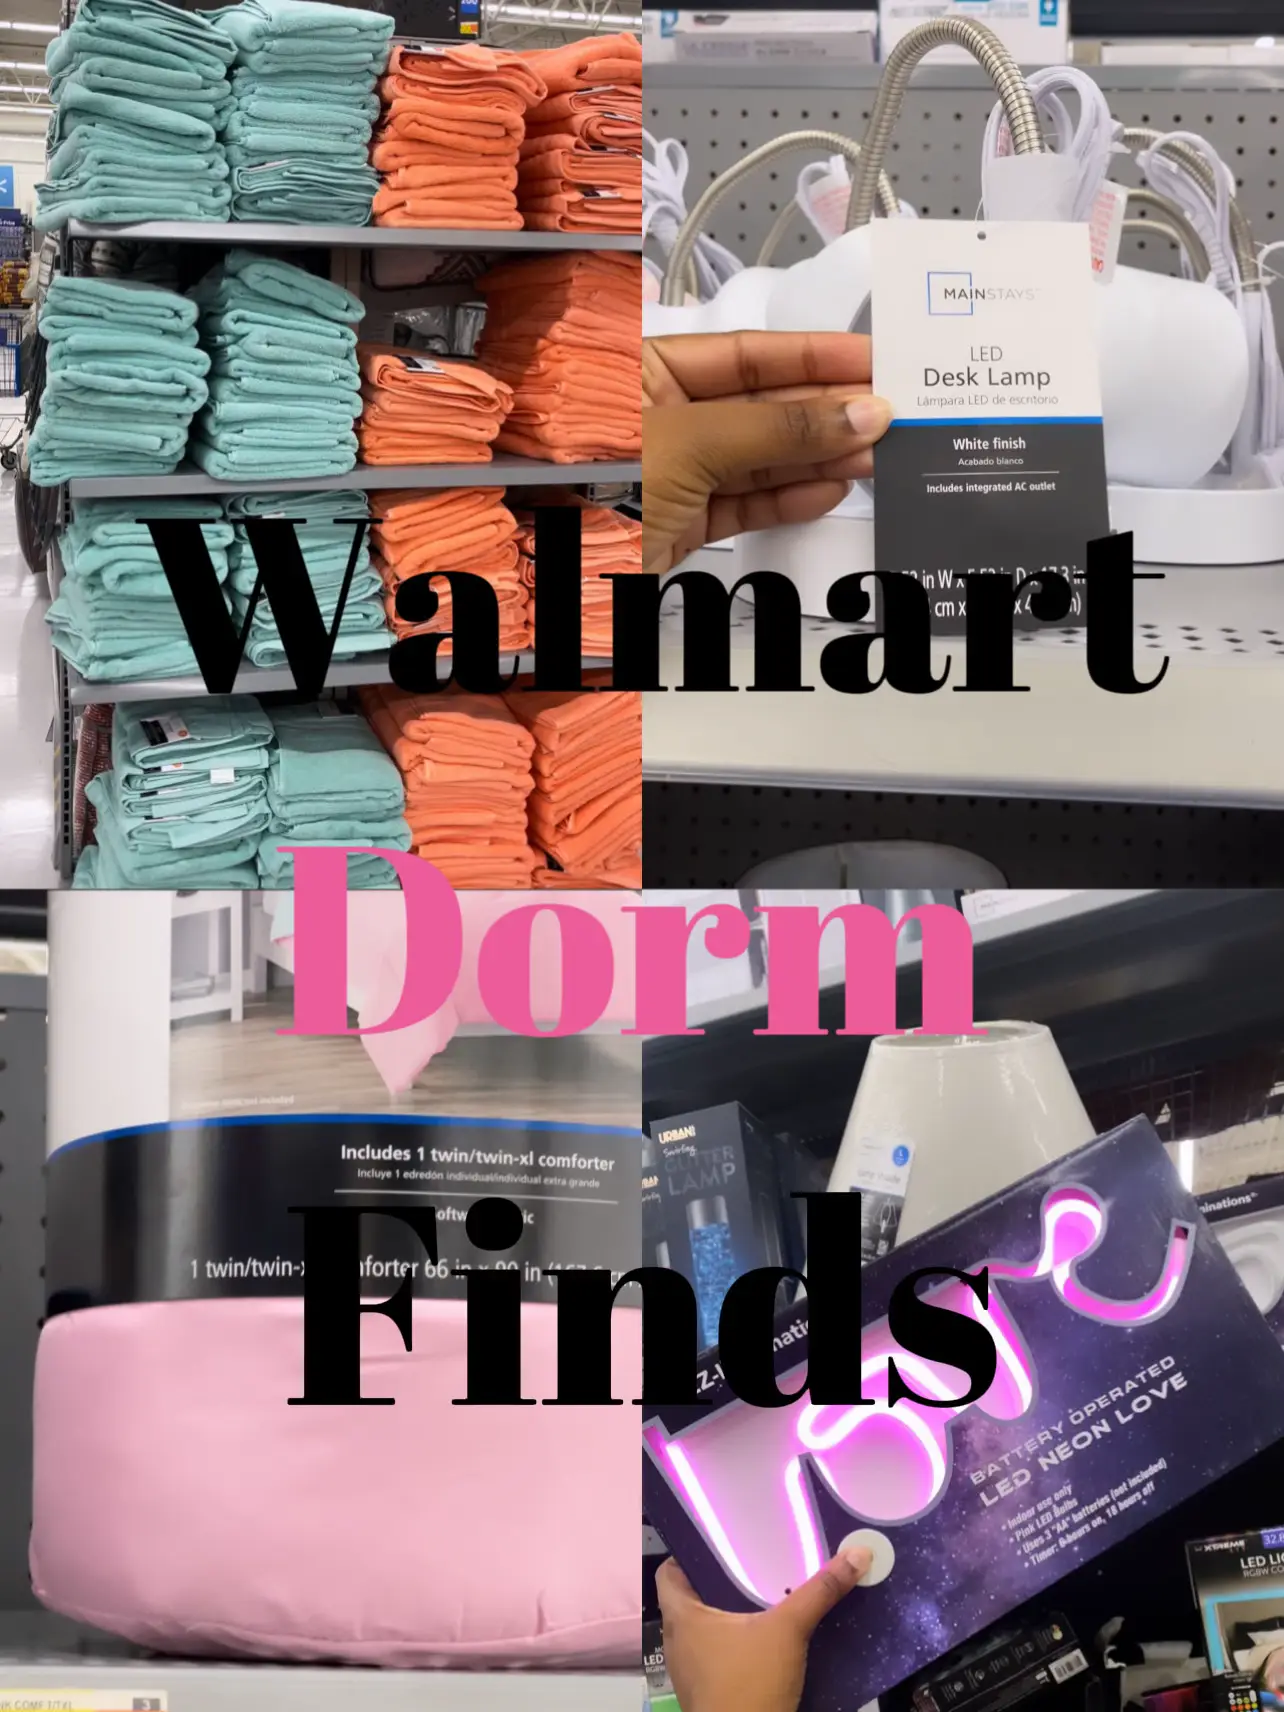 Walmart Dorm Must haves! | Article posted by Aaliyah Tiana | Lemon8